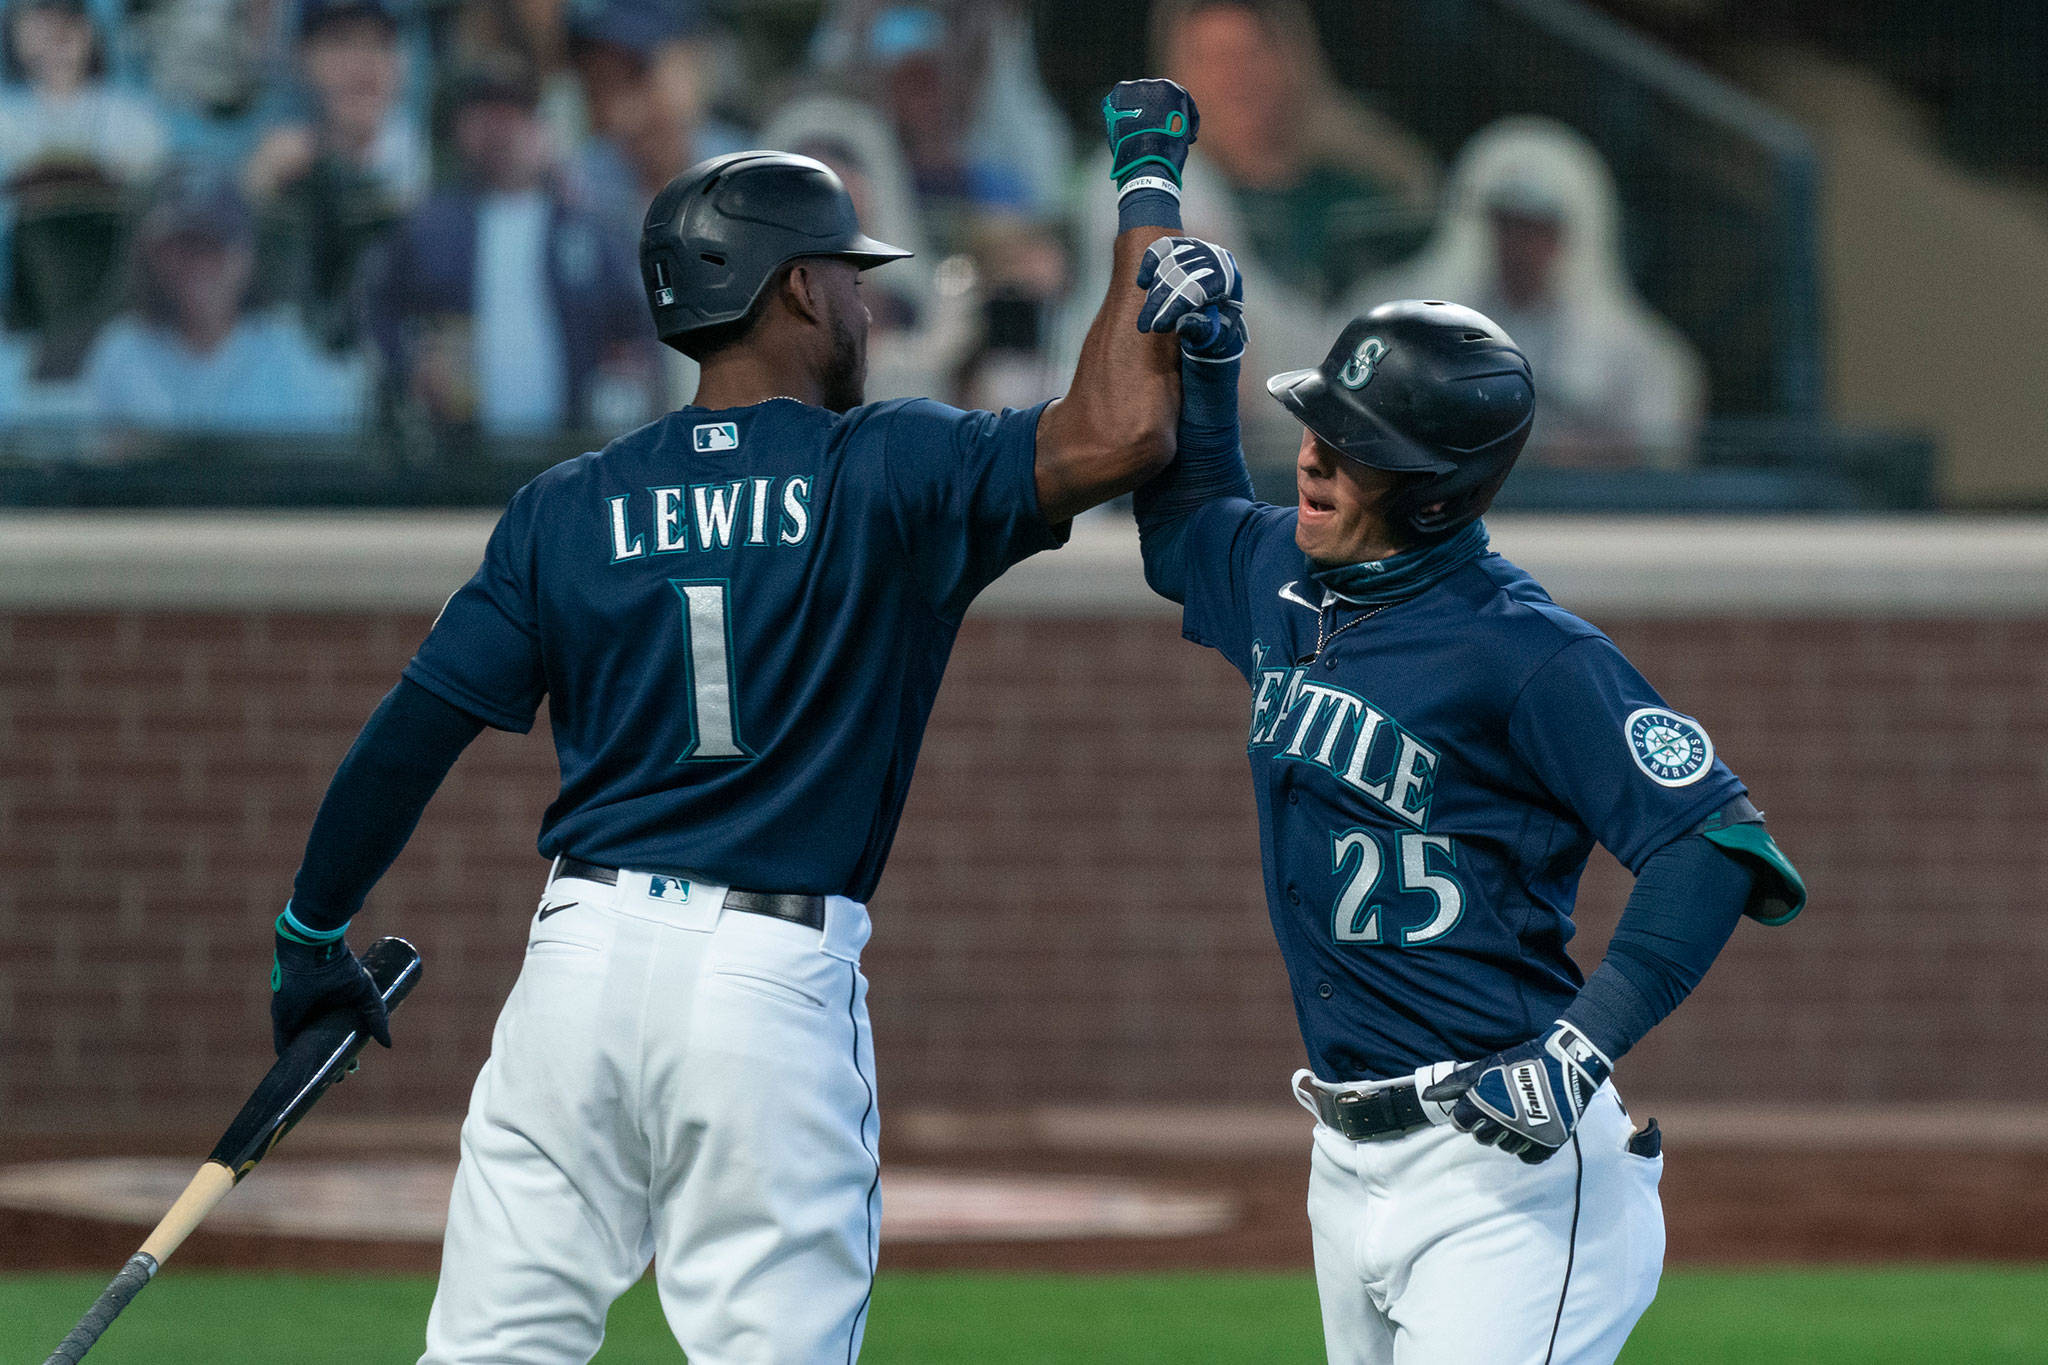 The Mariners’ Dylan Moore (right) is congratulated by teammate Kyle Lewis after hitting a solo home run against the Rangers on Sept. 7, 2020, in Seattle. (AP Photo/Stephen Brashear)